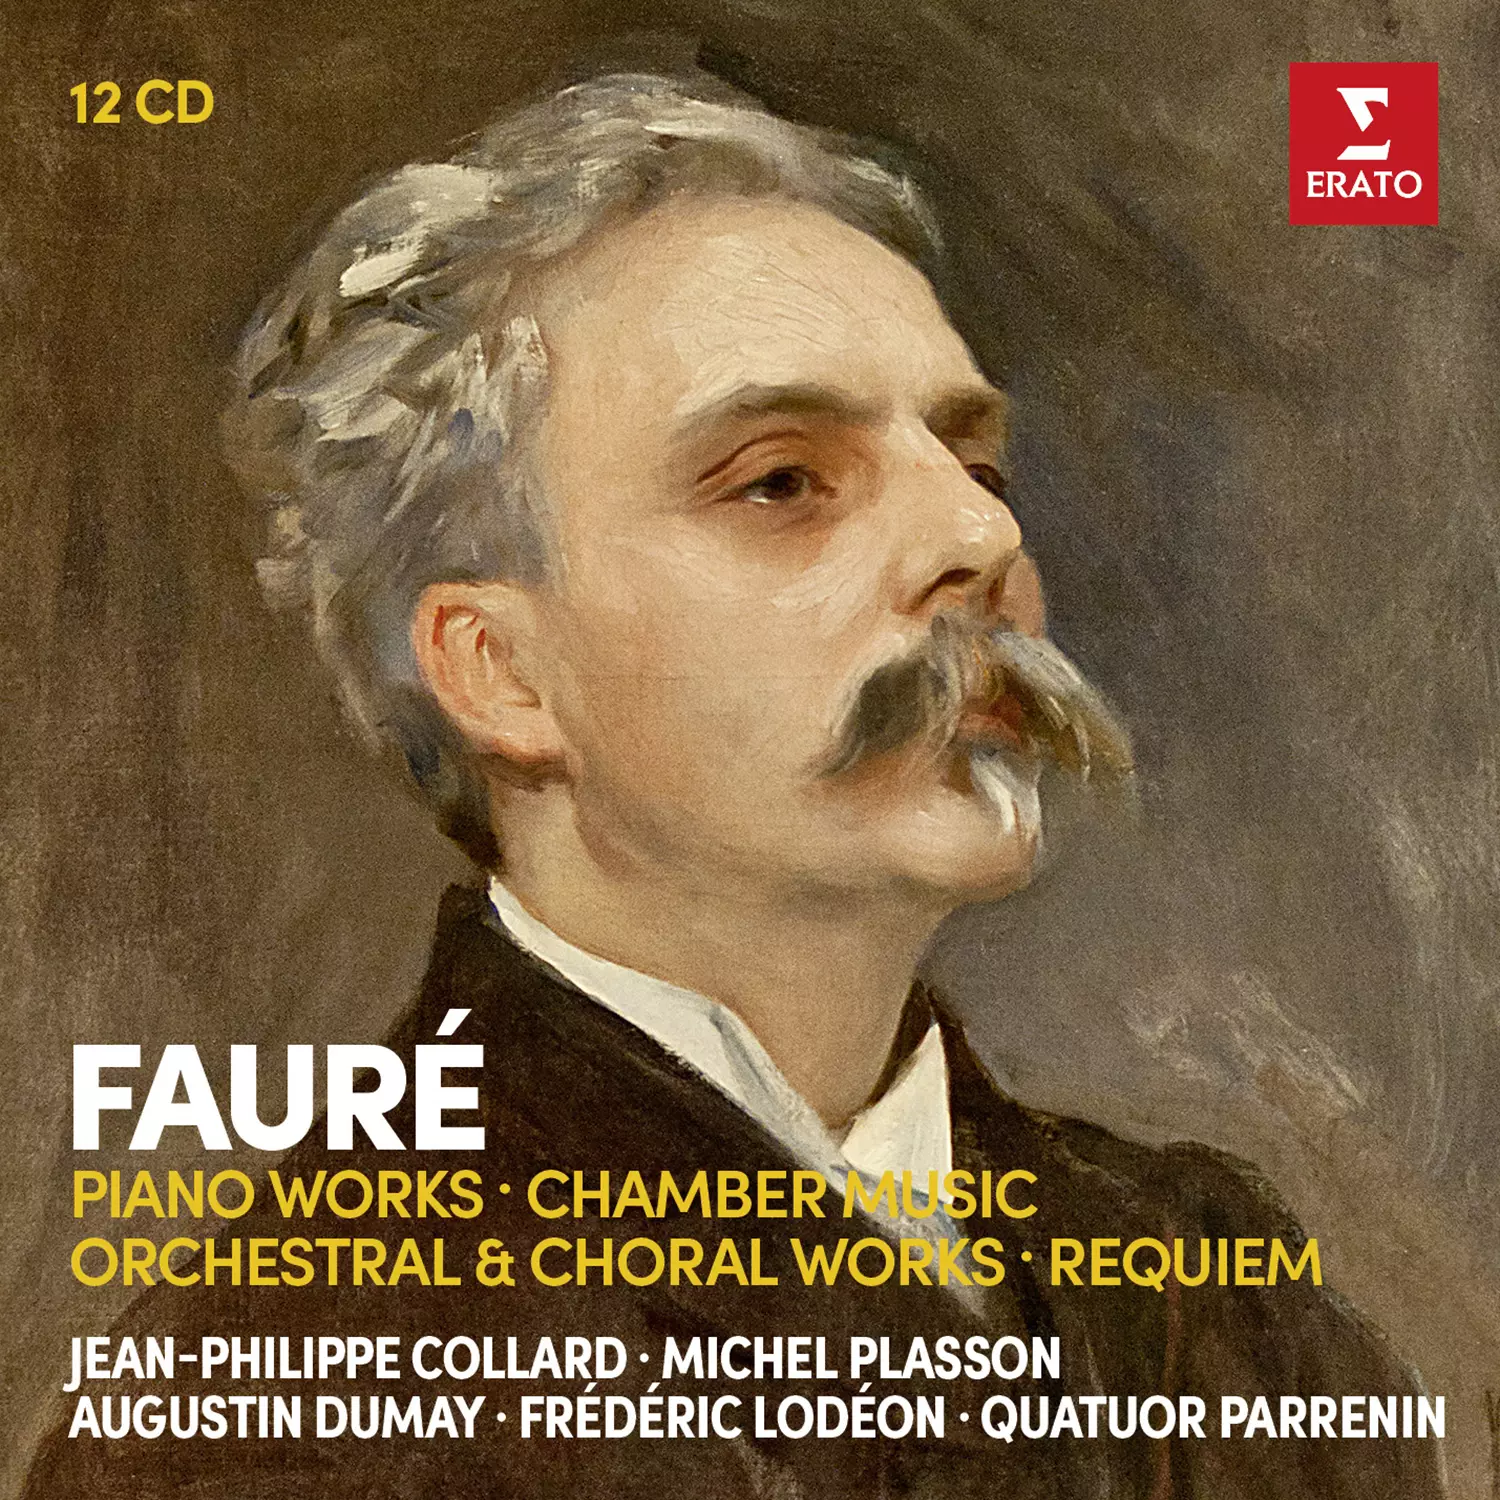 FAURÉ: Piano Works, Chamber Music, Orchestral & Choral Works, Requiem